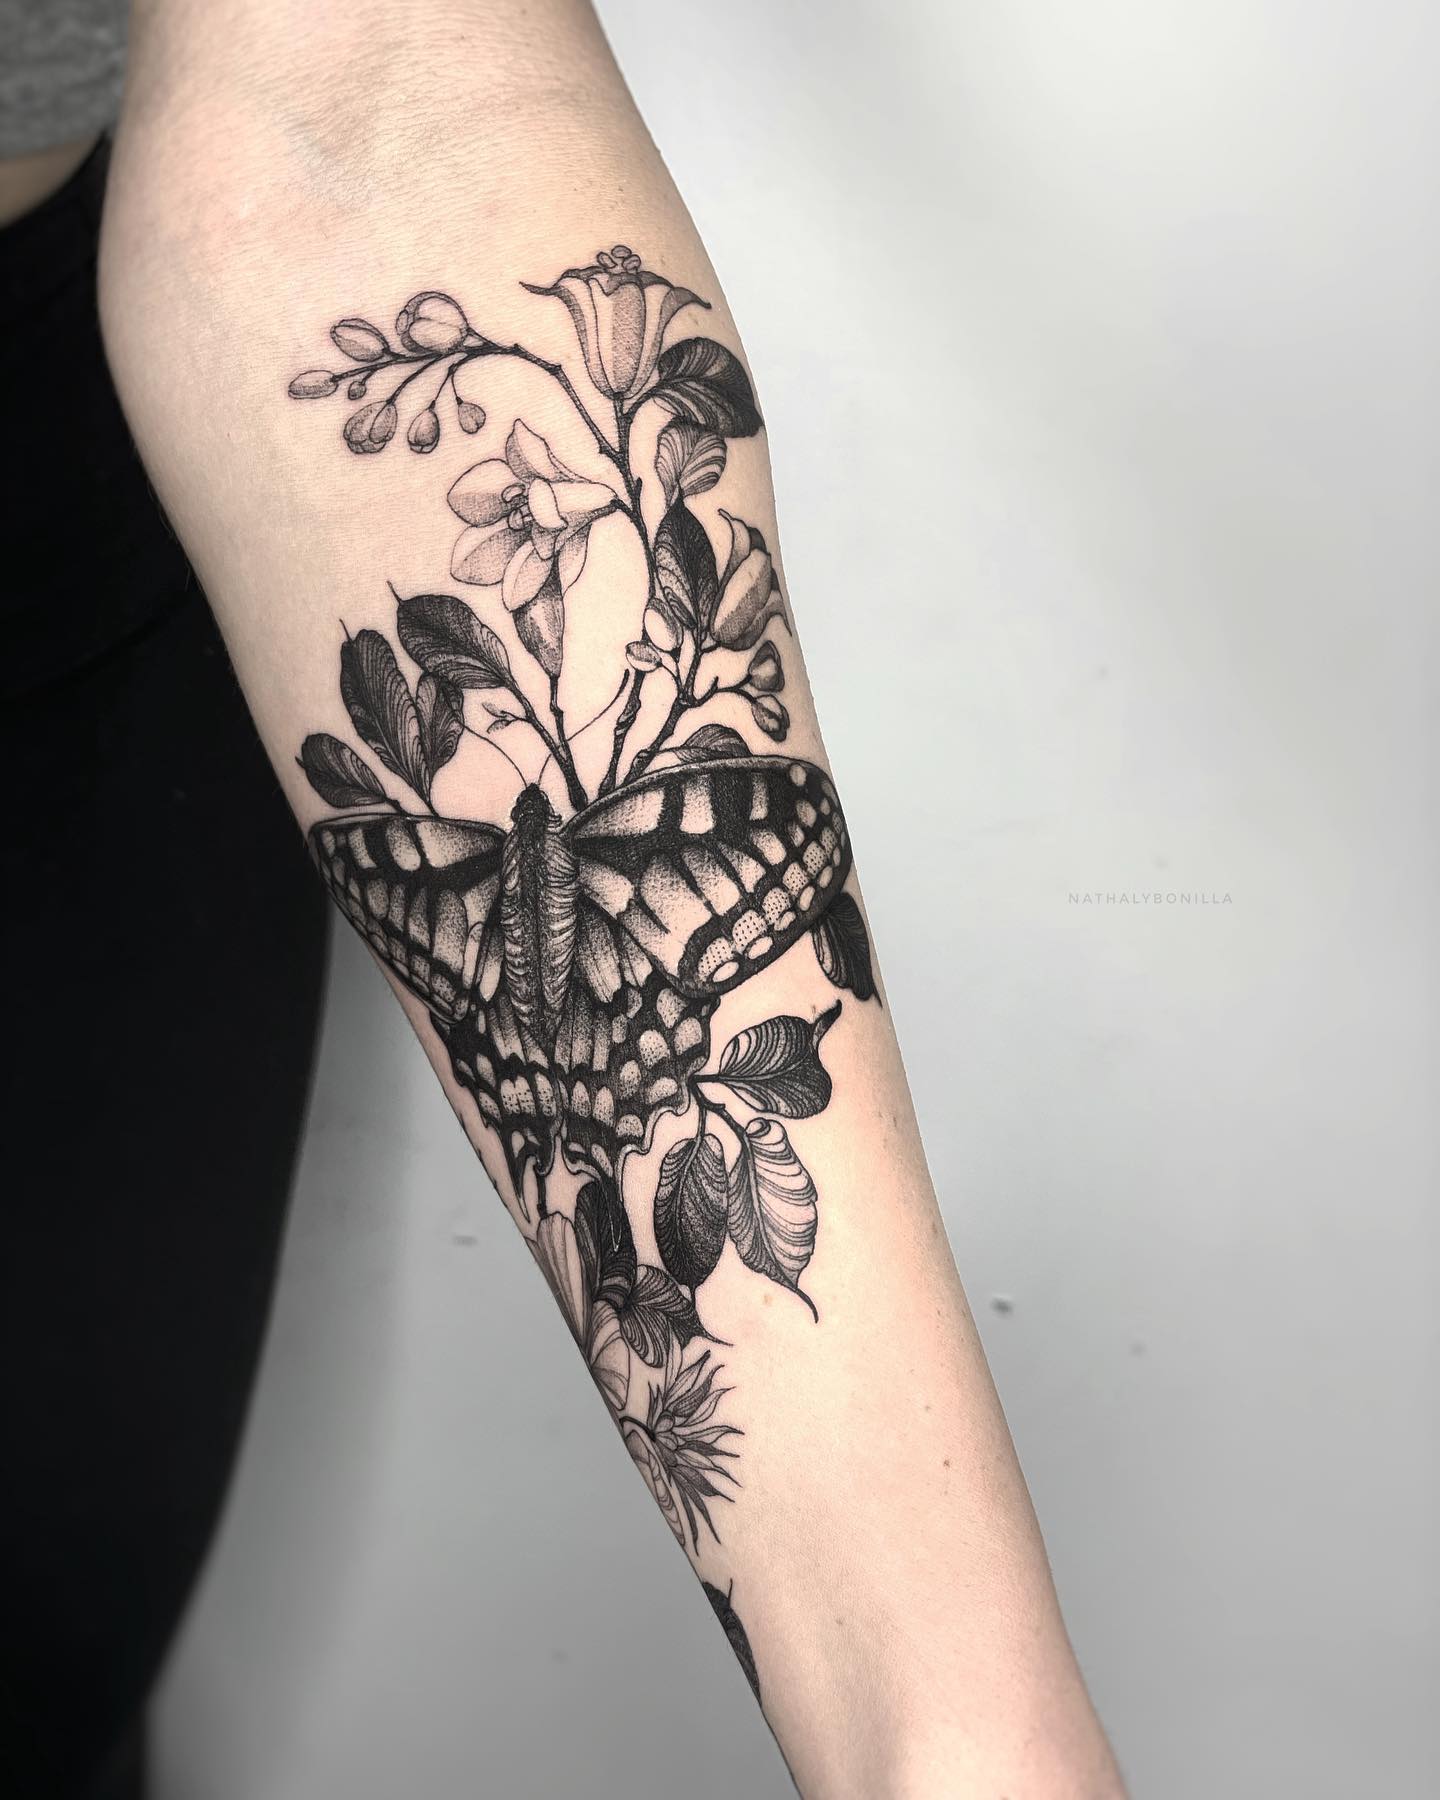 Intricate Butterfly and Floral Arm Tattoo